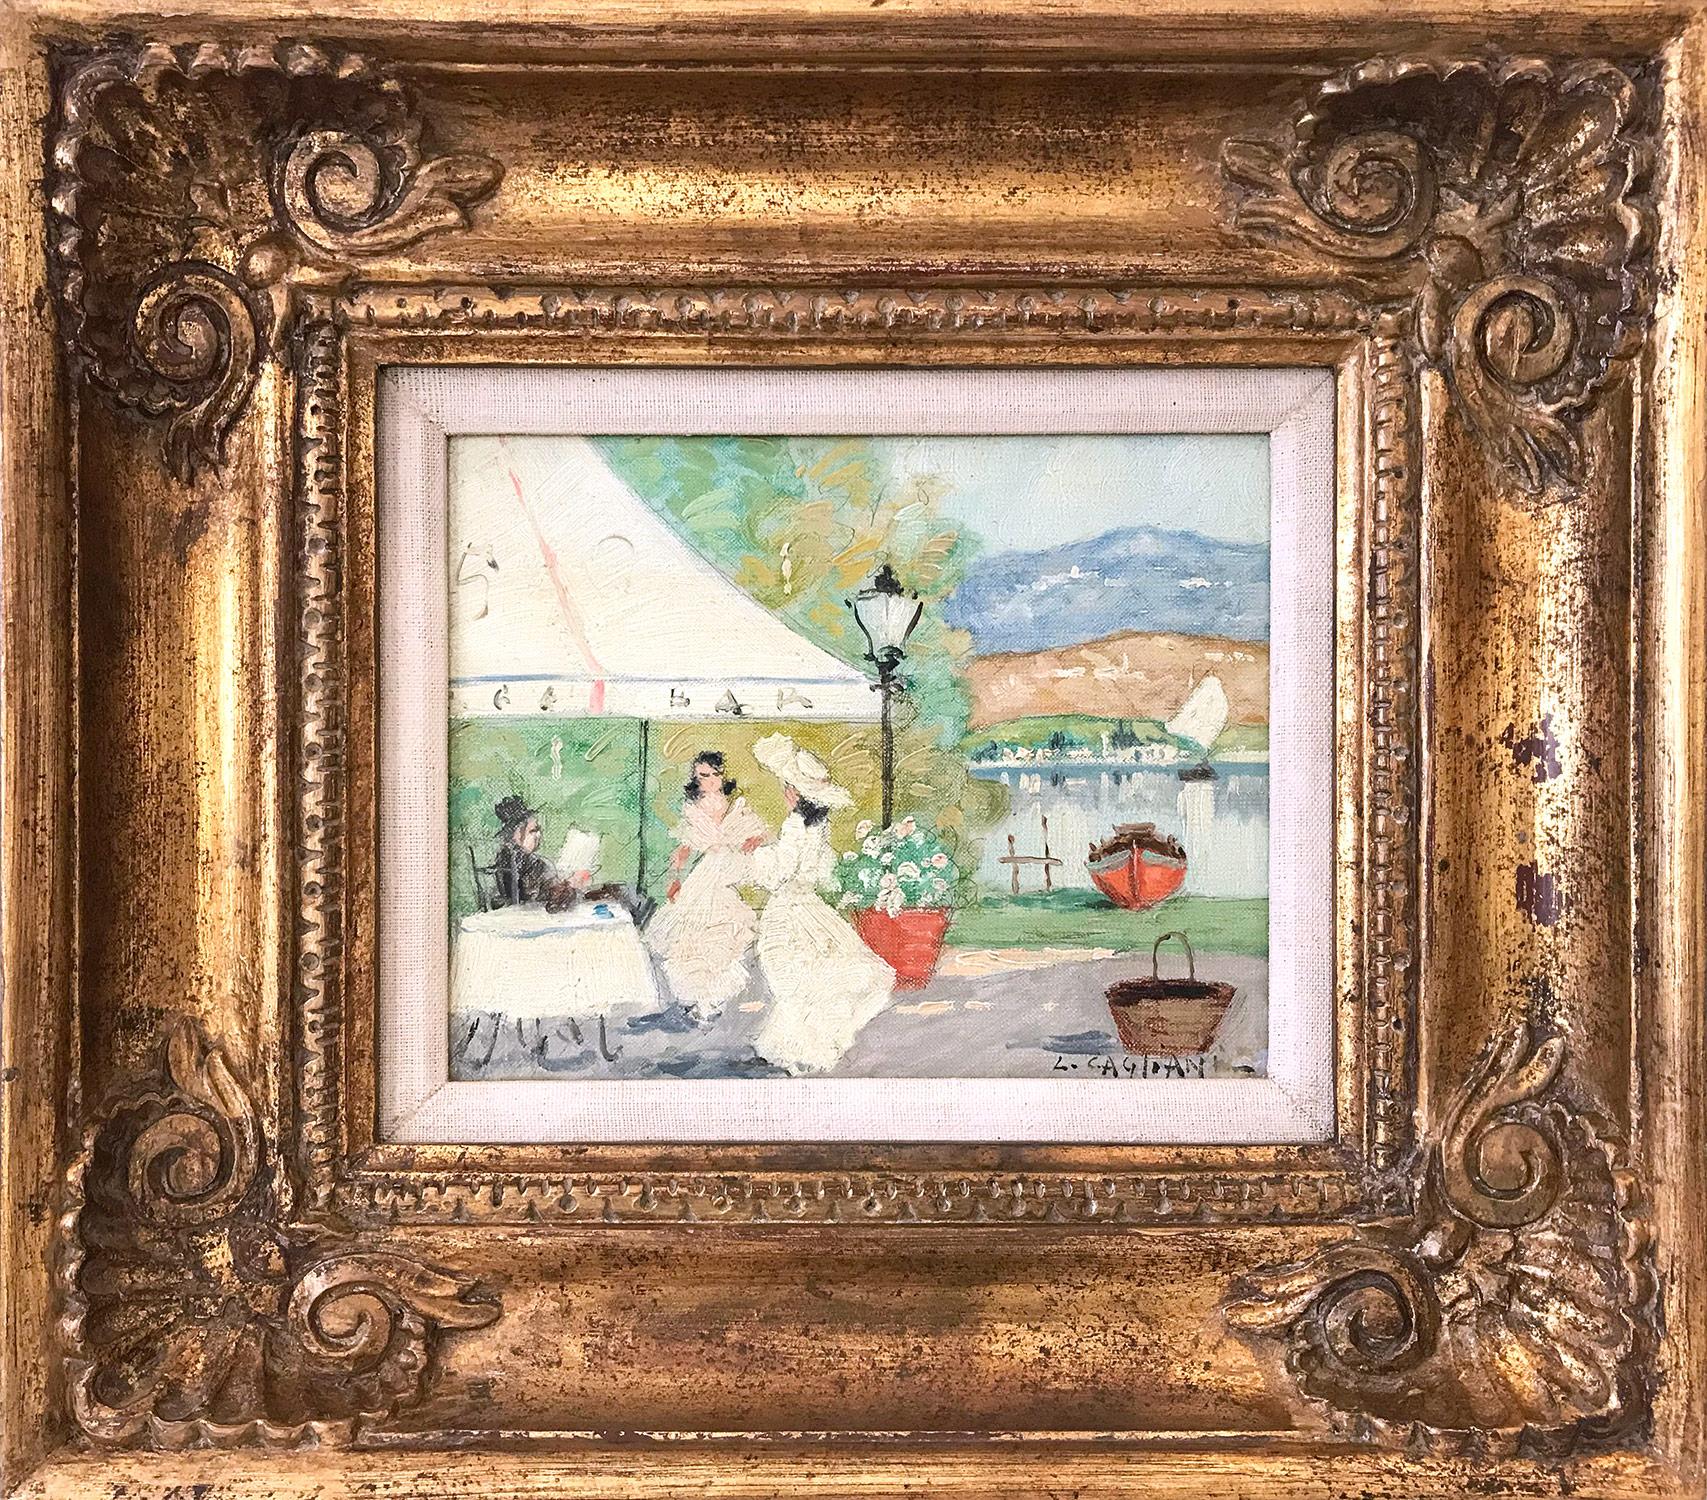 Luigi Cagliani Figurative Painting - "Figures by the Cafe with Sailboats" Impressionist Scene Oil on Canvas Painting